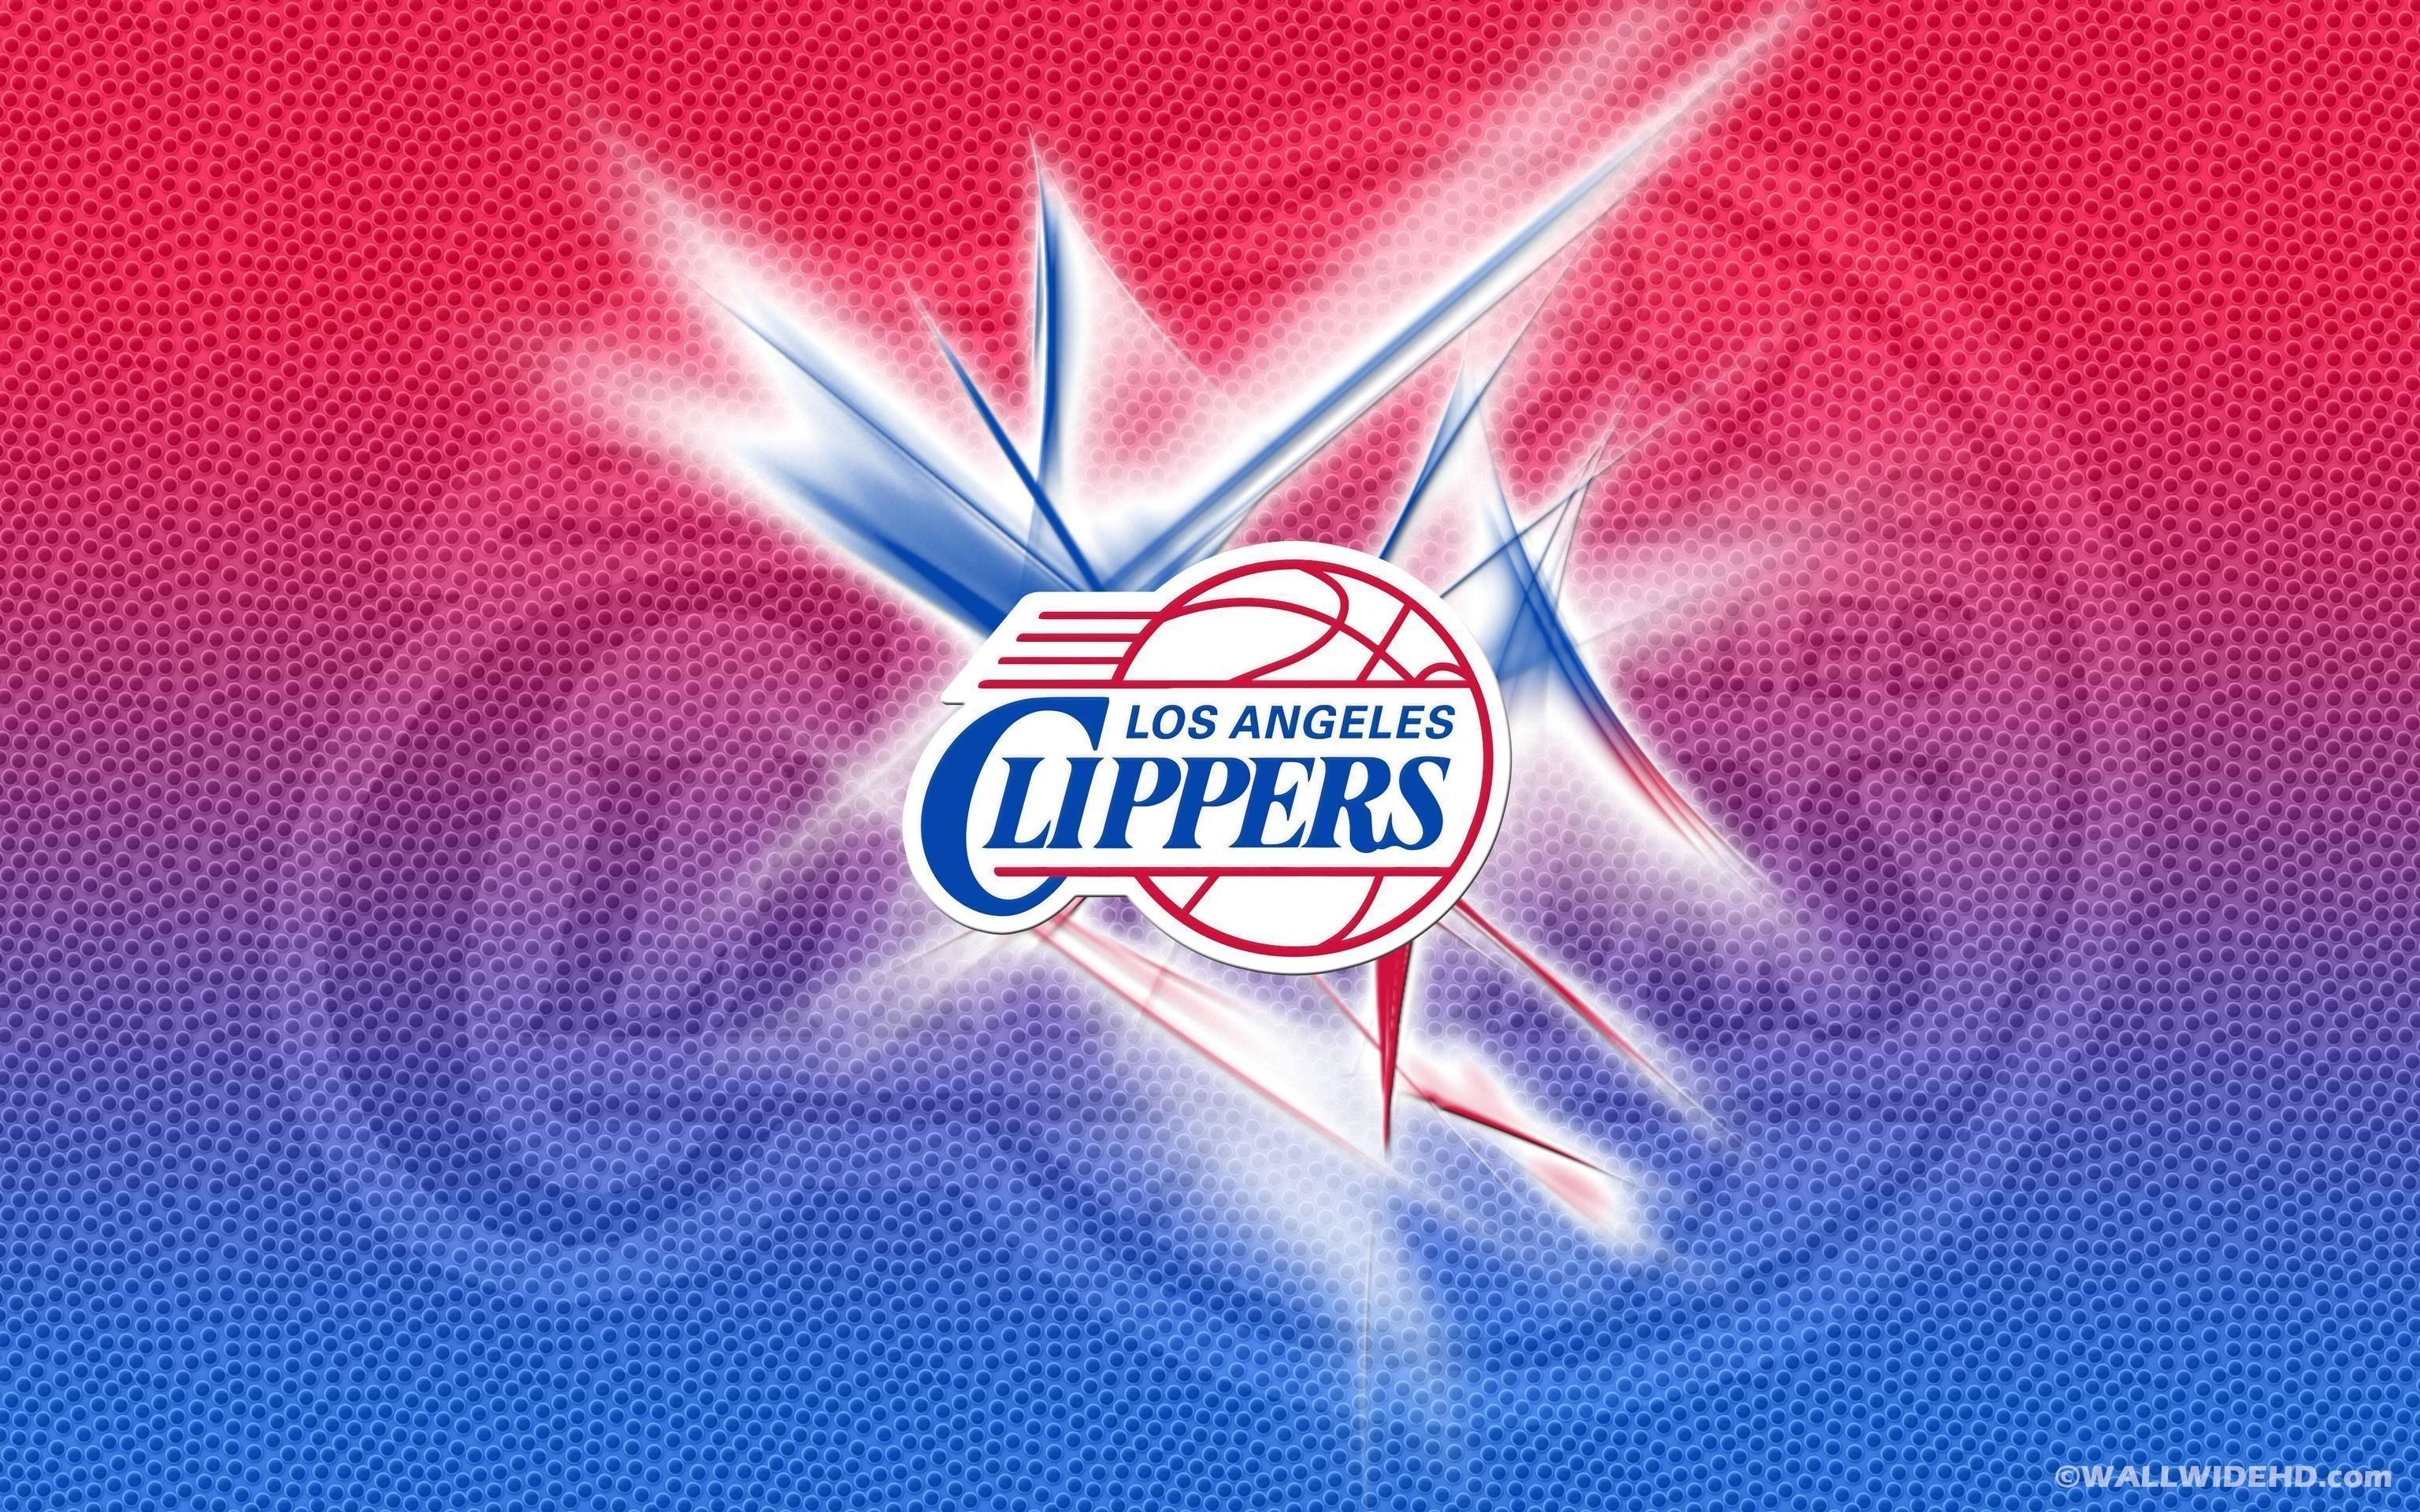 Los Angeles Clippers 2014 Logo Nba Wallpaper Wide Or Hd Sports 3072x1920